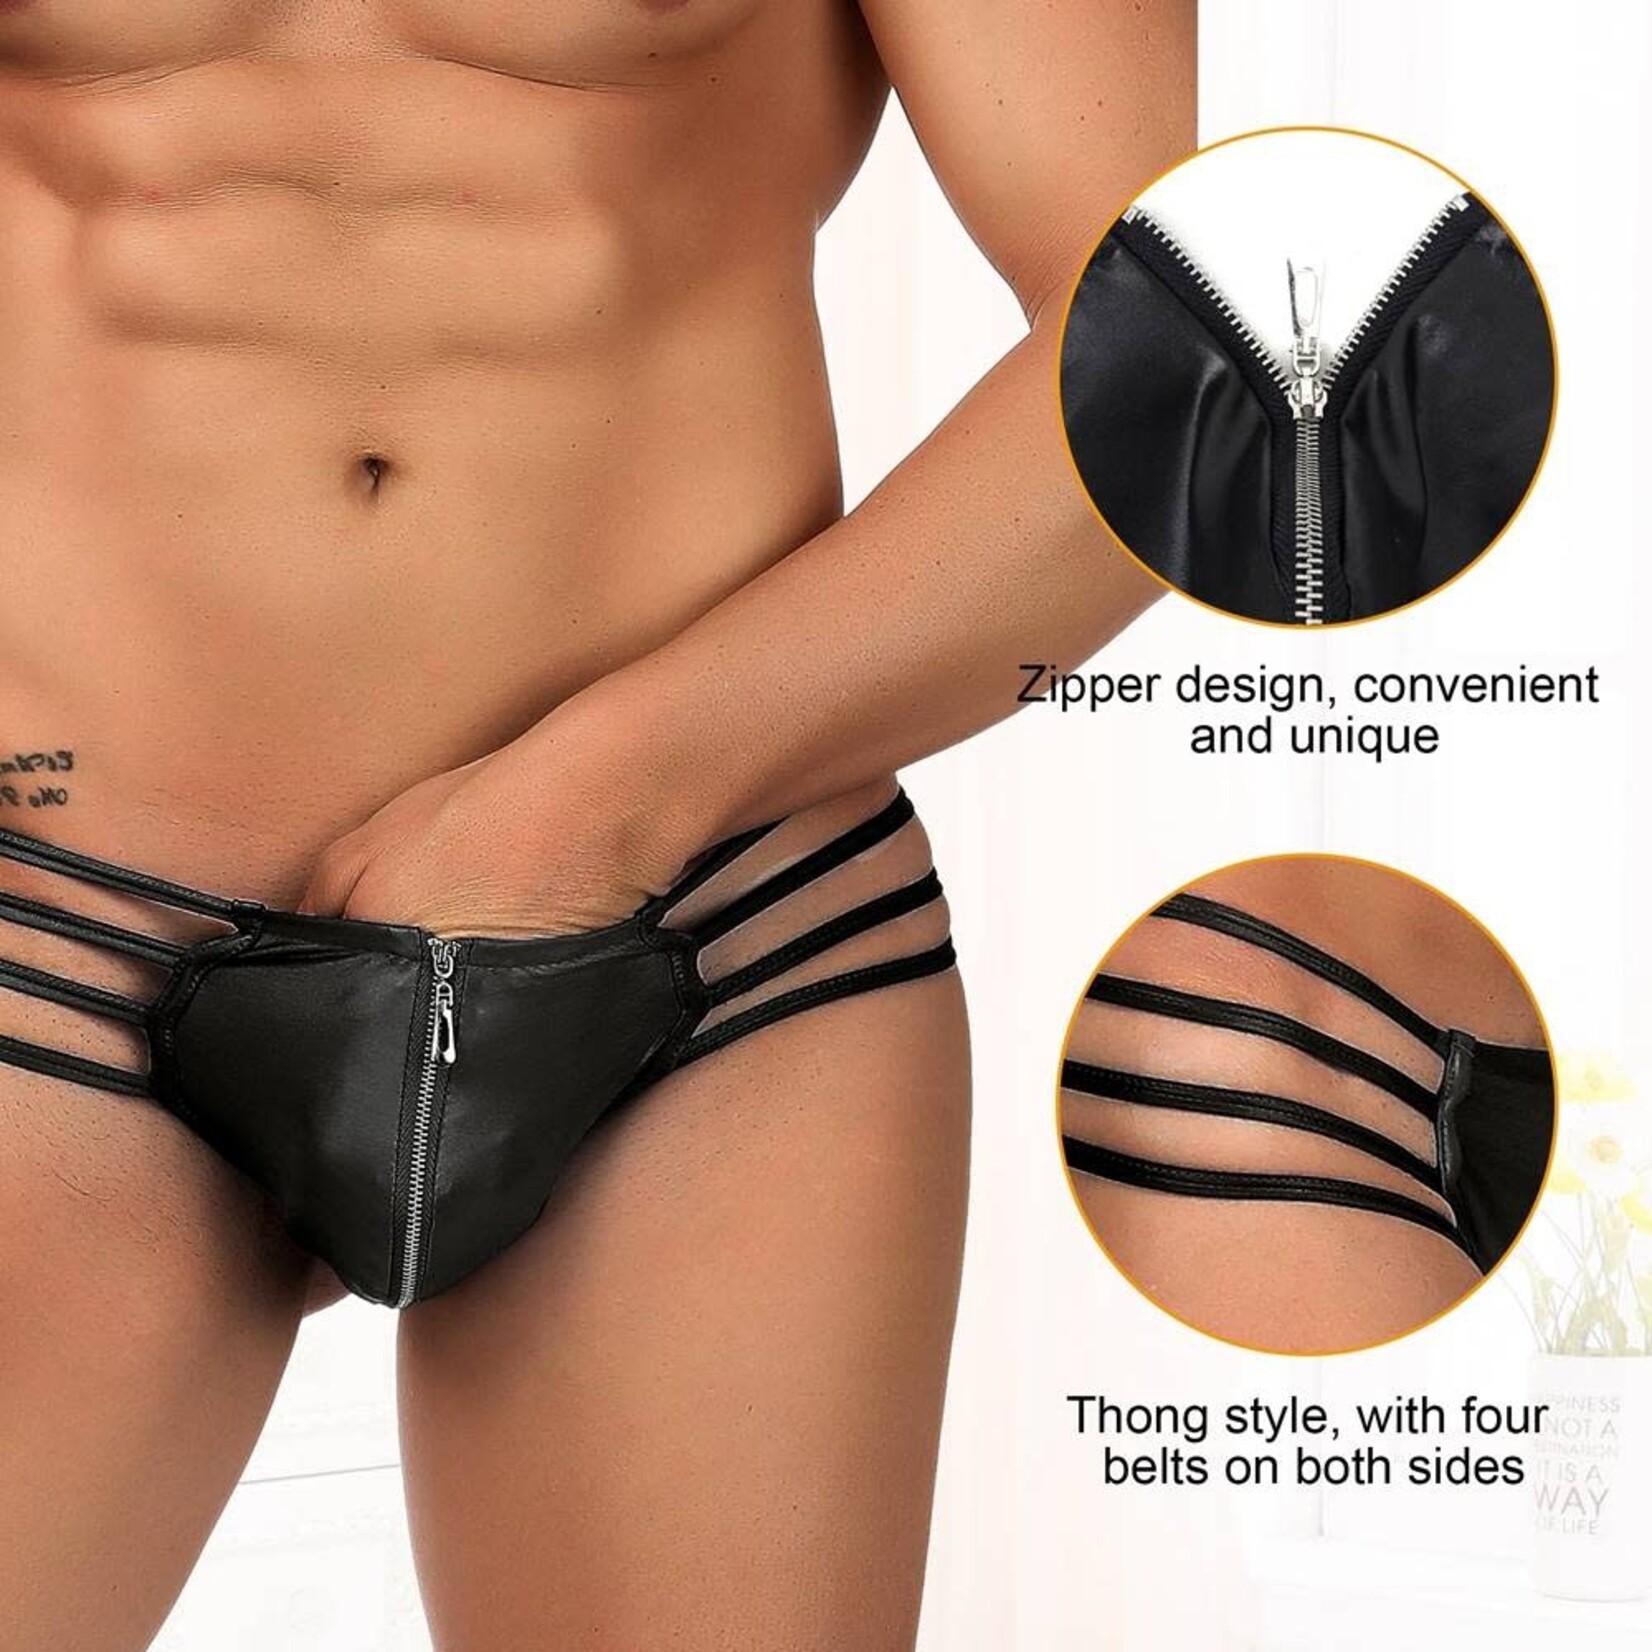 OH YEAH! -  MENS SYNTHETIC LEATHER SEXY ZIPPER PANTIES L